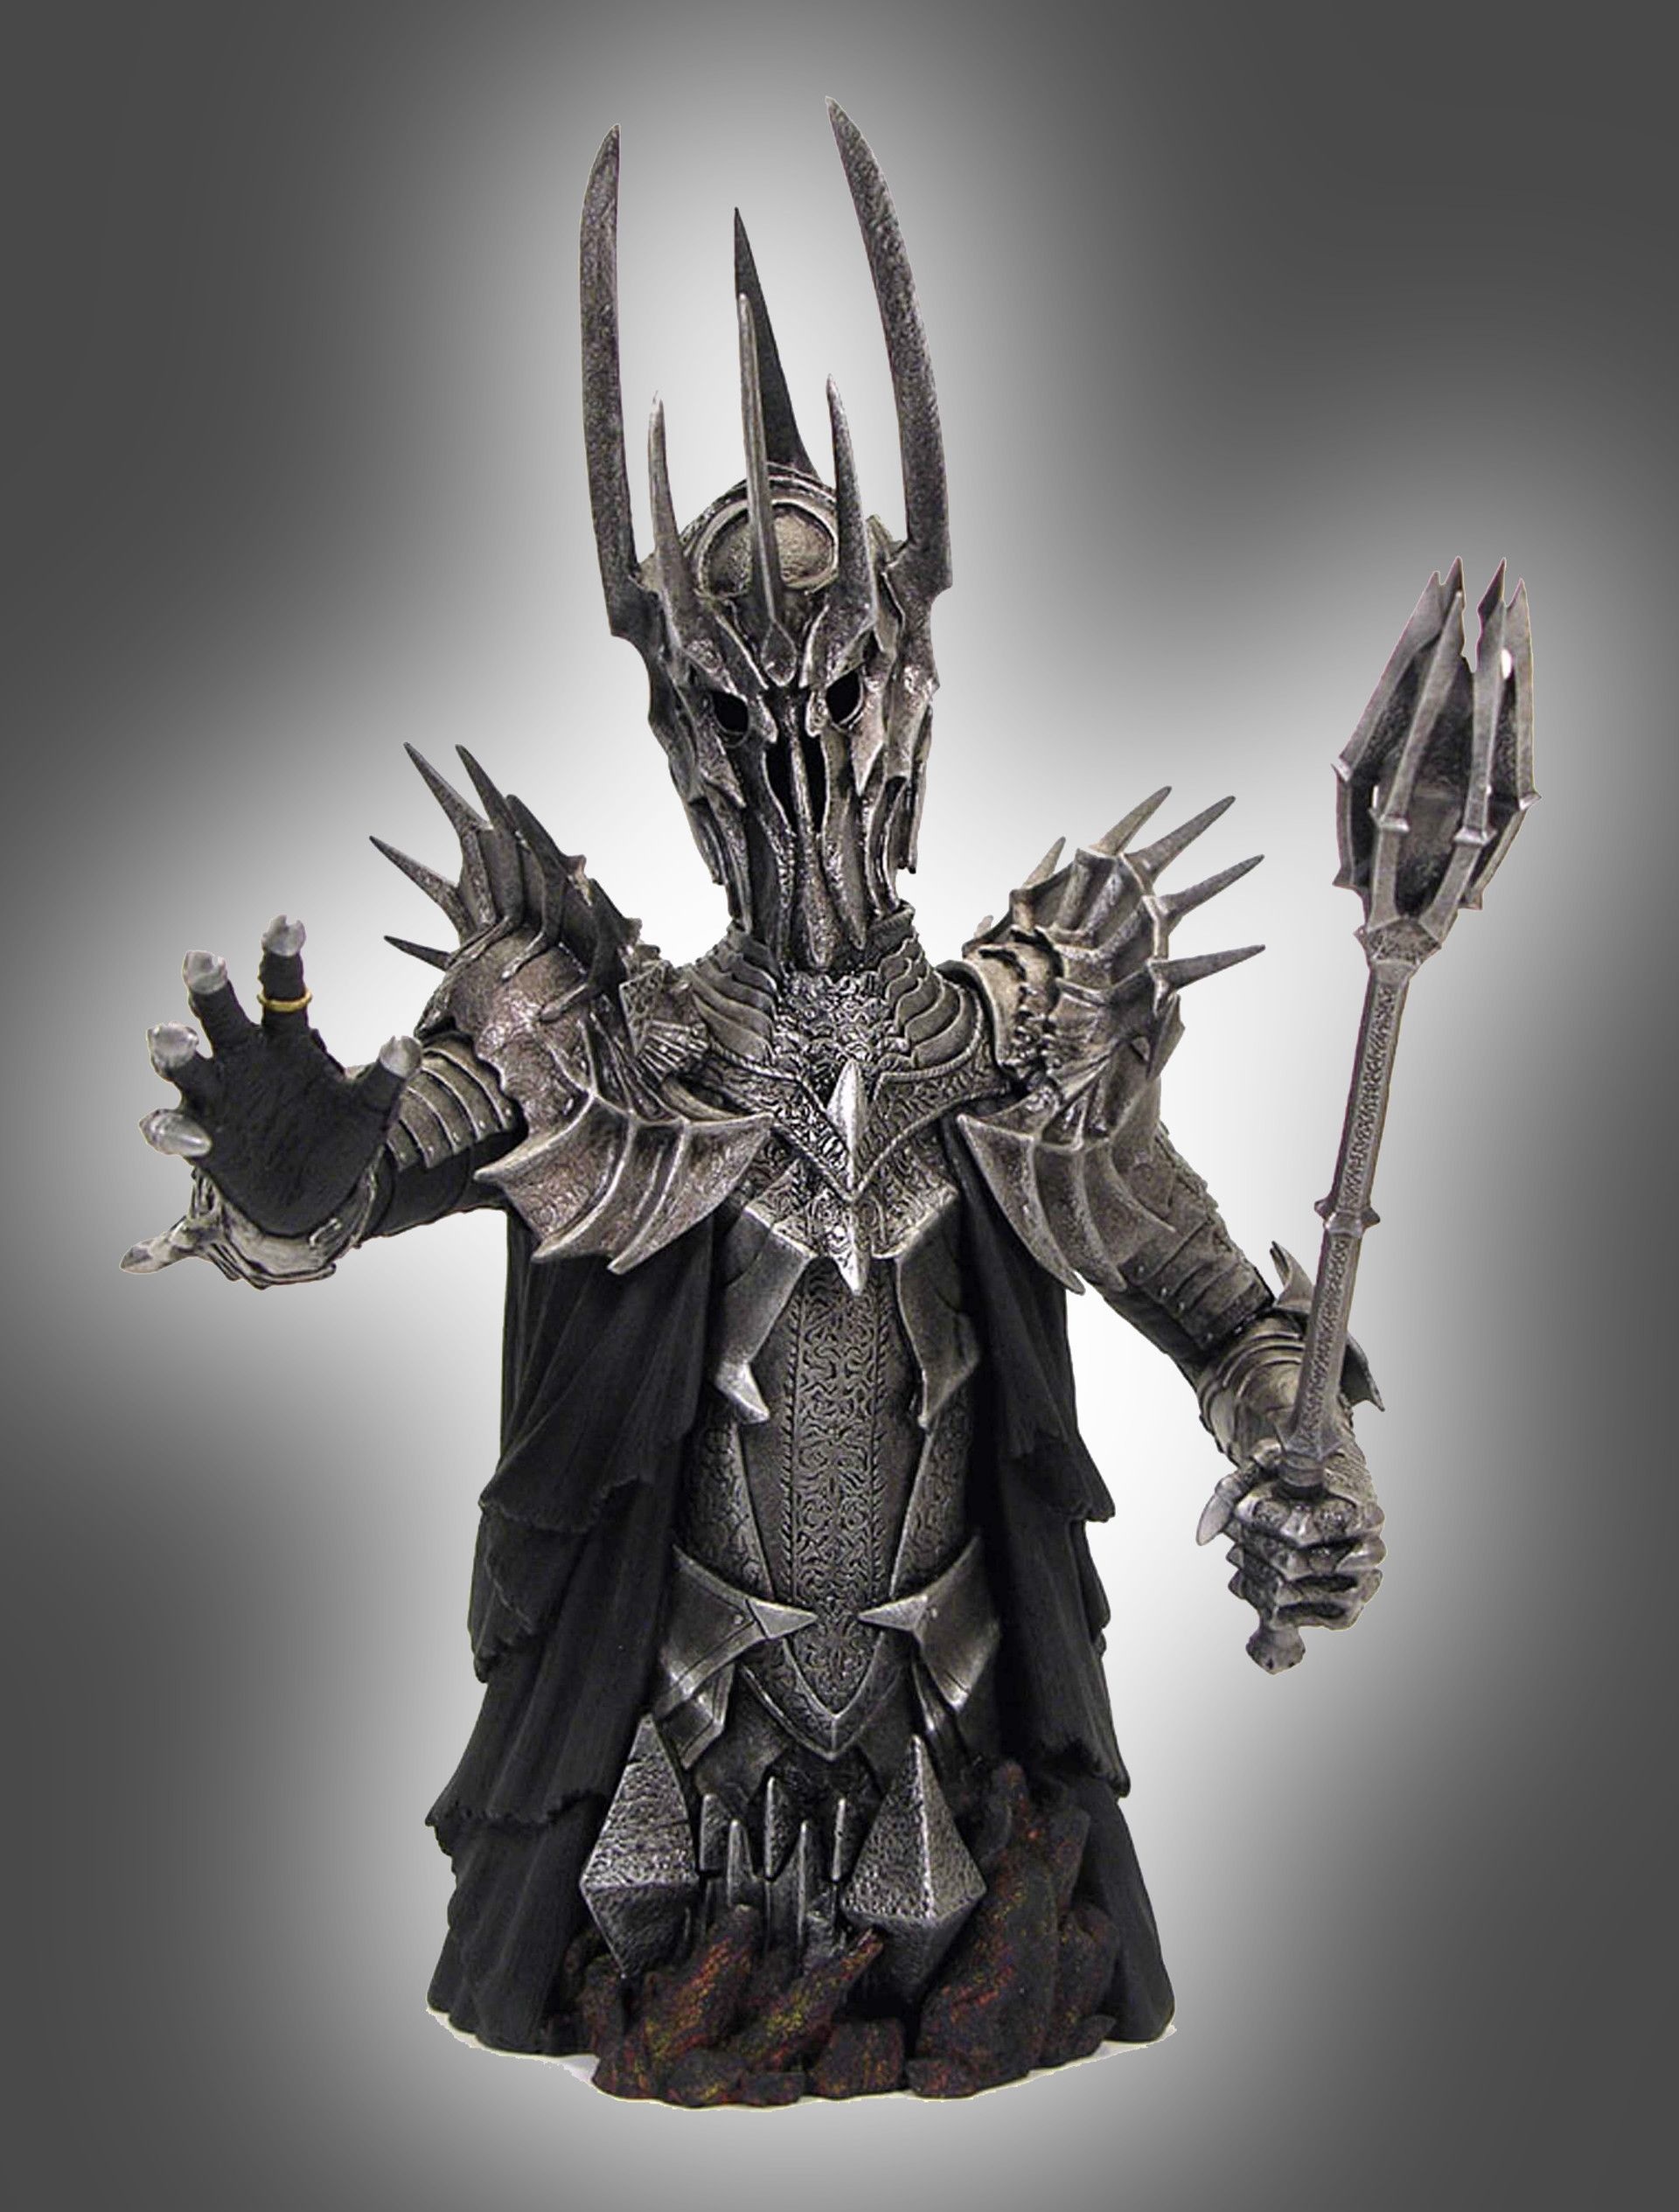 Necromancer, Lord of the Rings, Gentle Giant, Sauron, 1920x2530 HD Handy